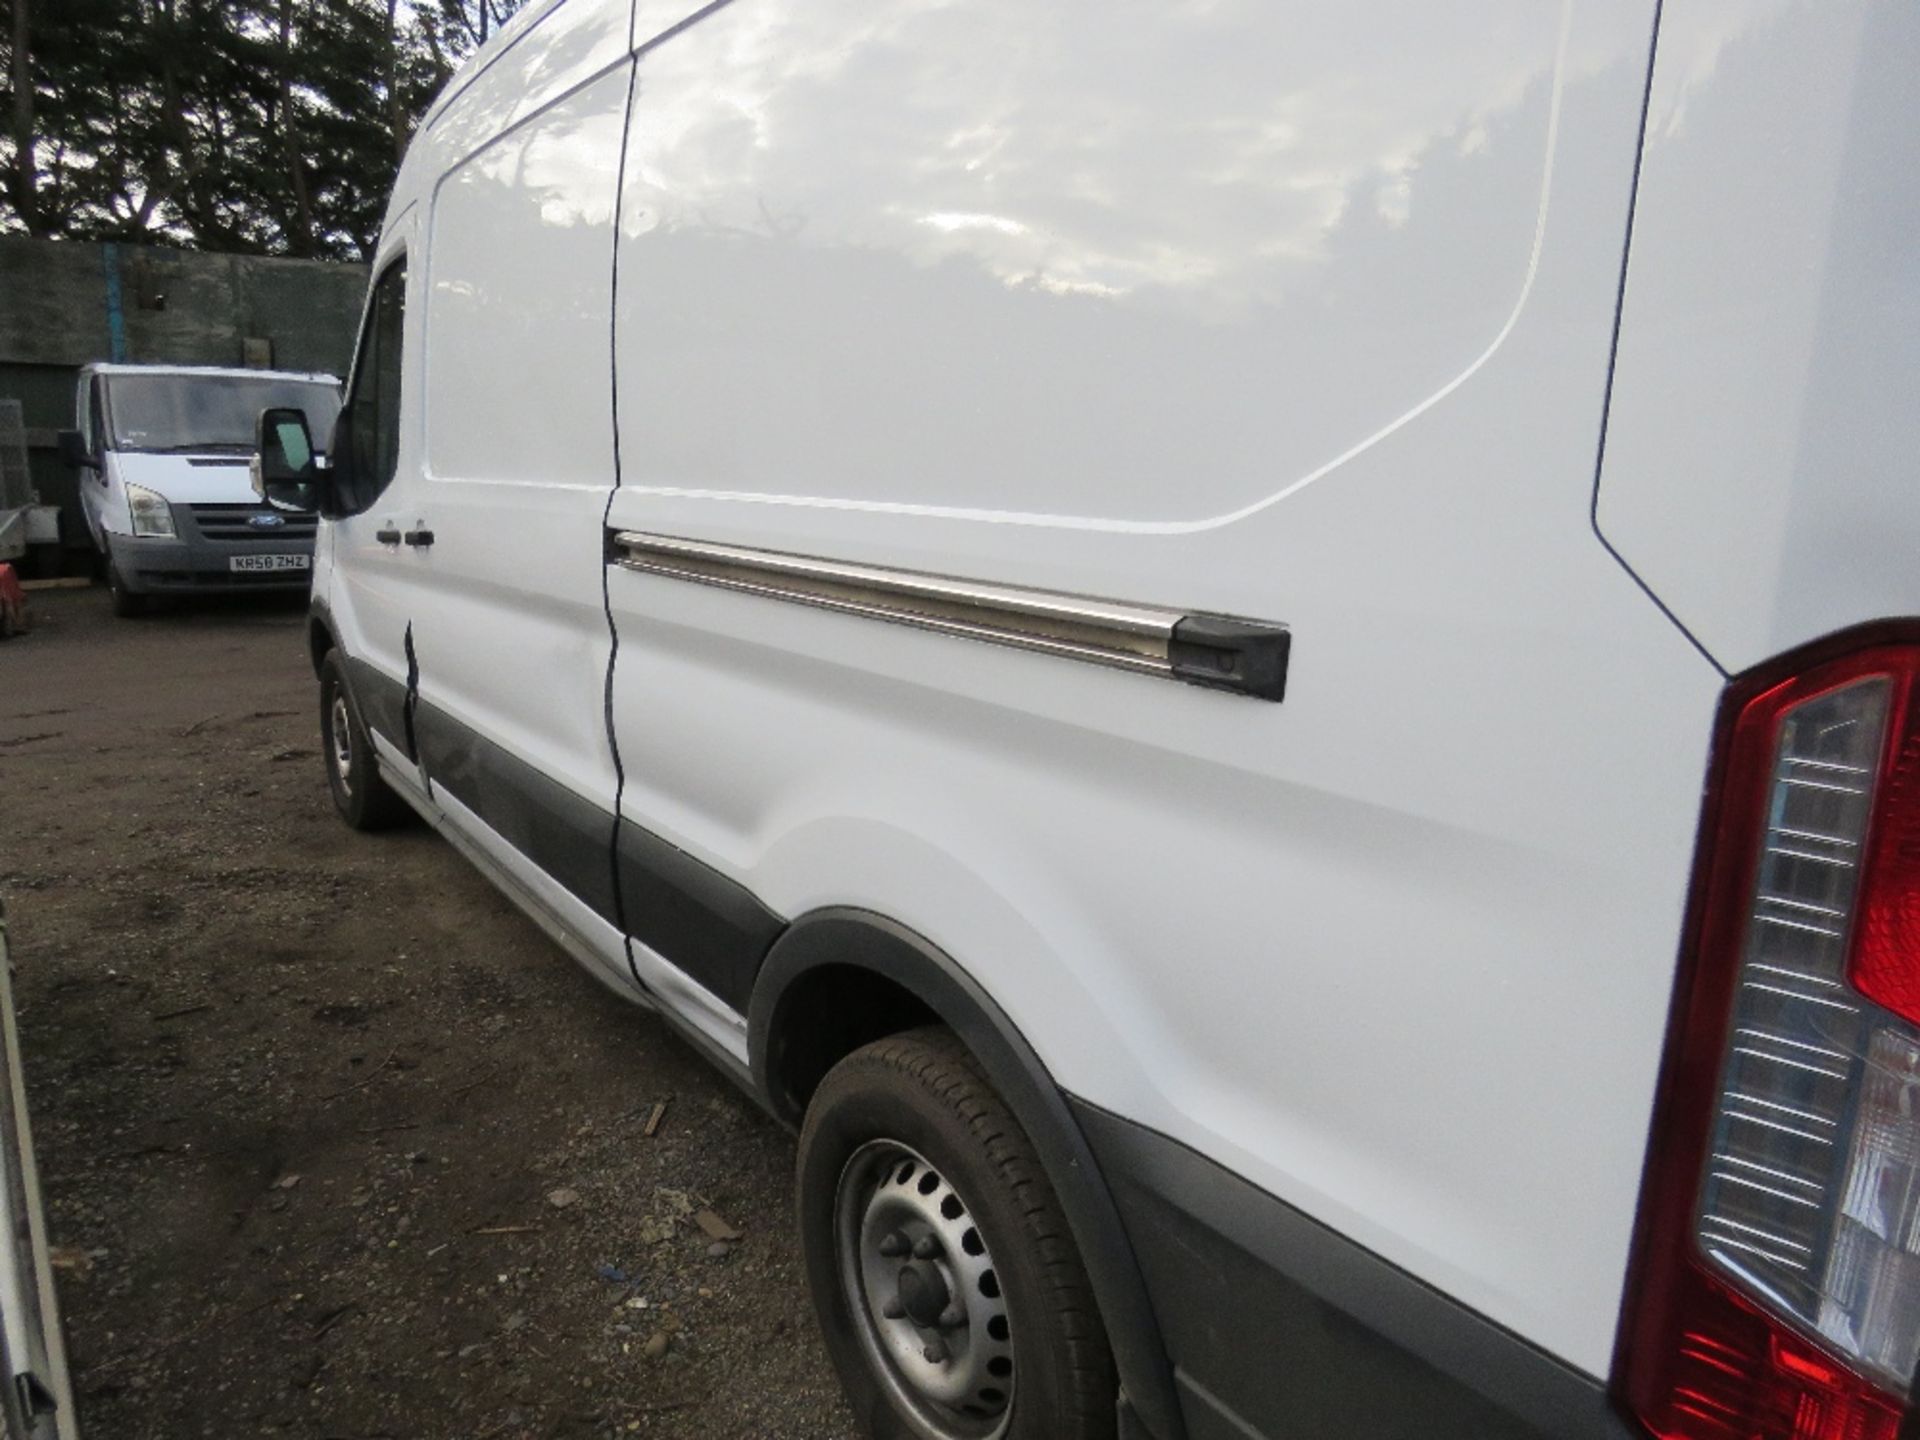 FORD TRANSIT 350 HIGH TOP LONG WHEEL BASE PANEL VAN REG:AJ64 DXC.EURO 5 EMMISSIONS. WITH V5. ONE OWN - Image 17 of 18